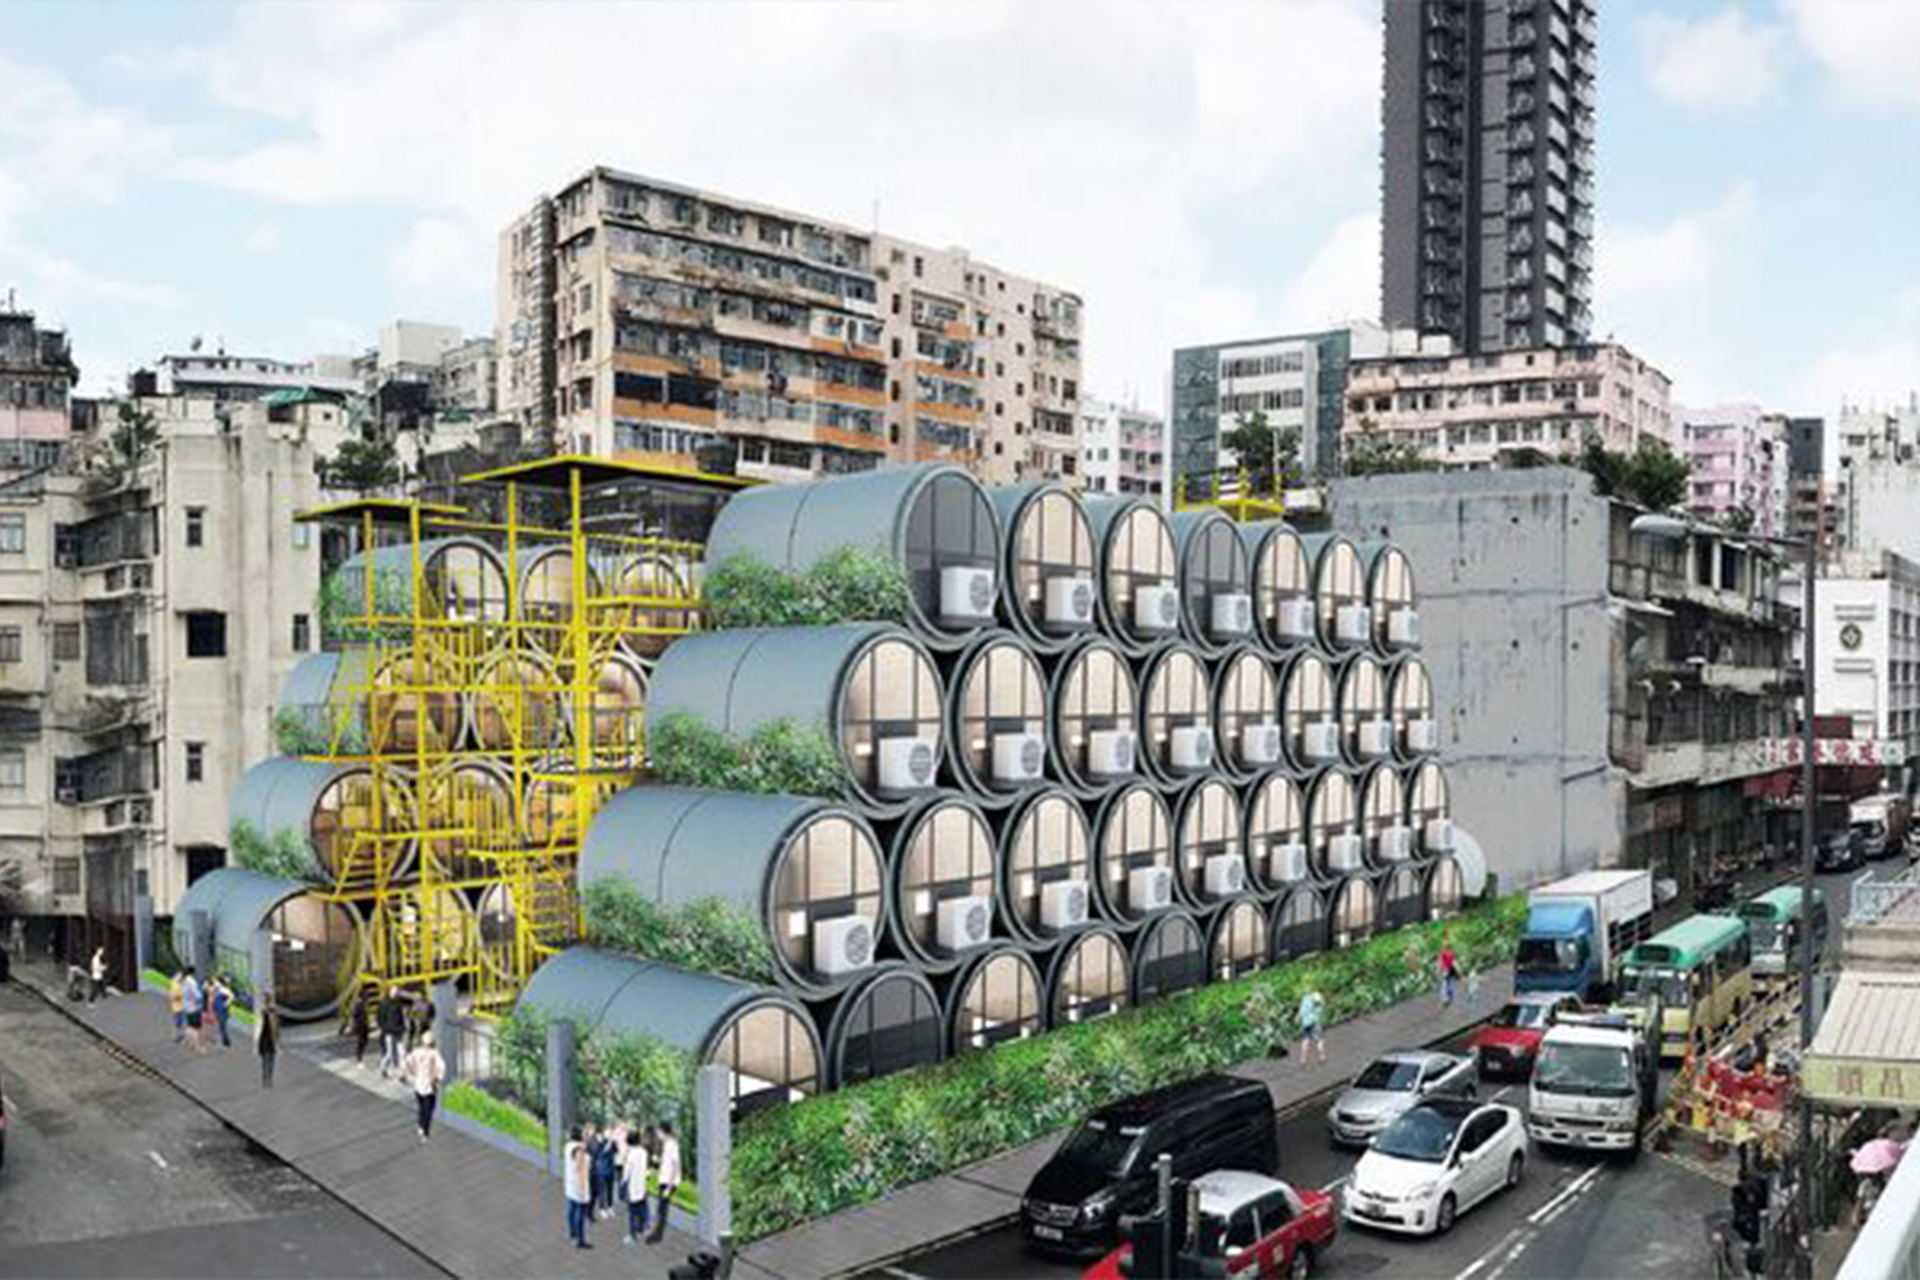 Our top 5 predictions for 2022 | Hotel rooms that look like stacked barrels